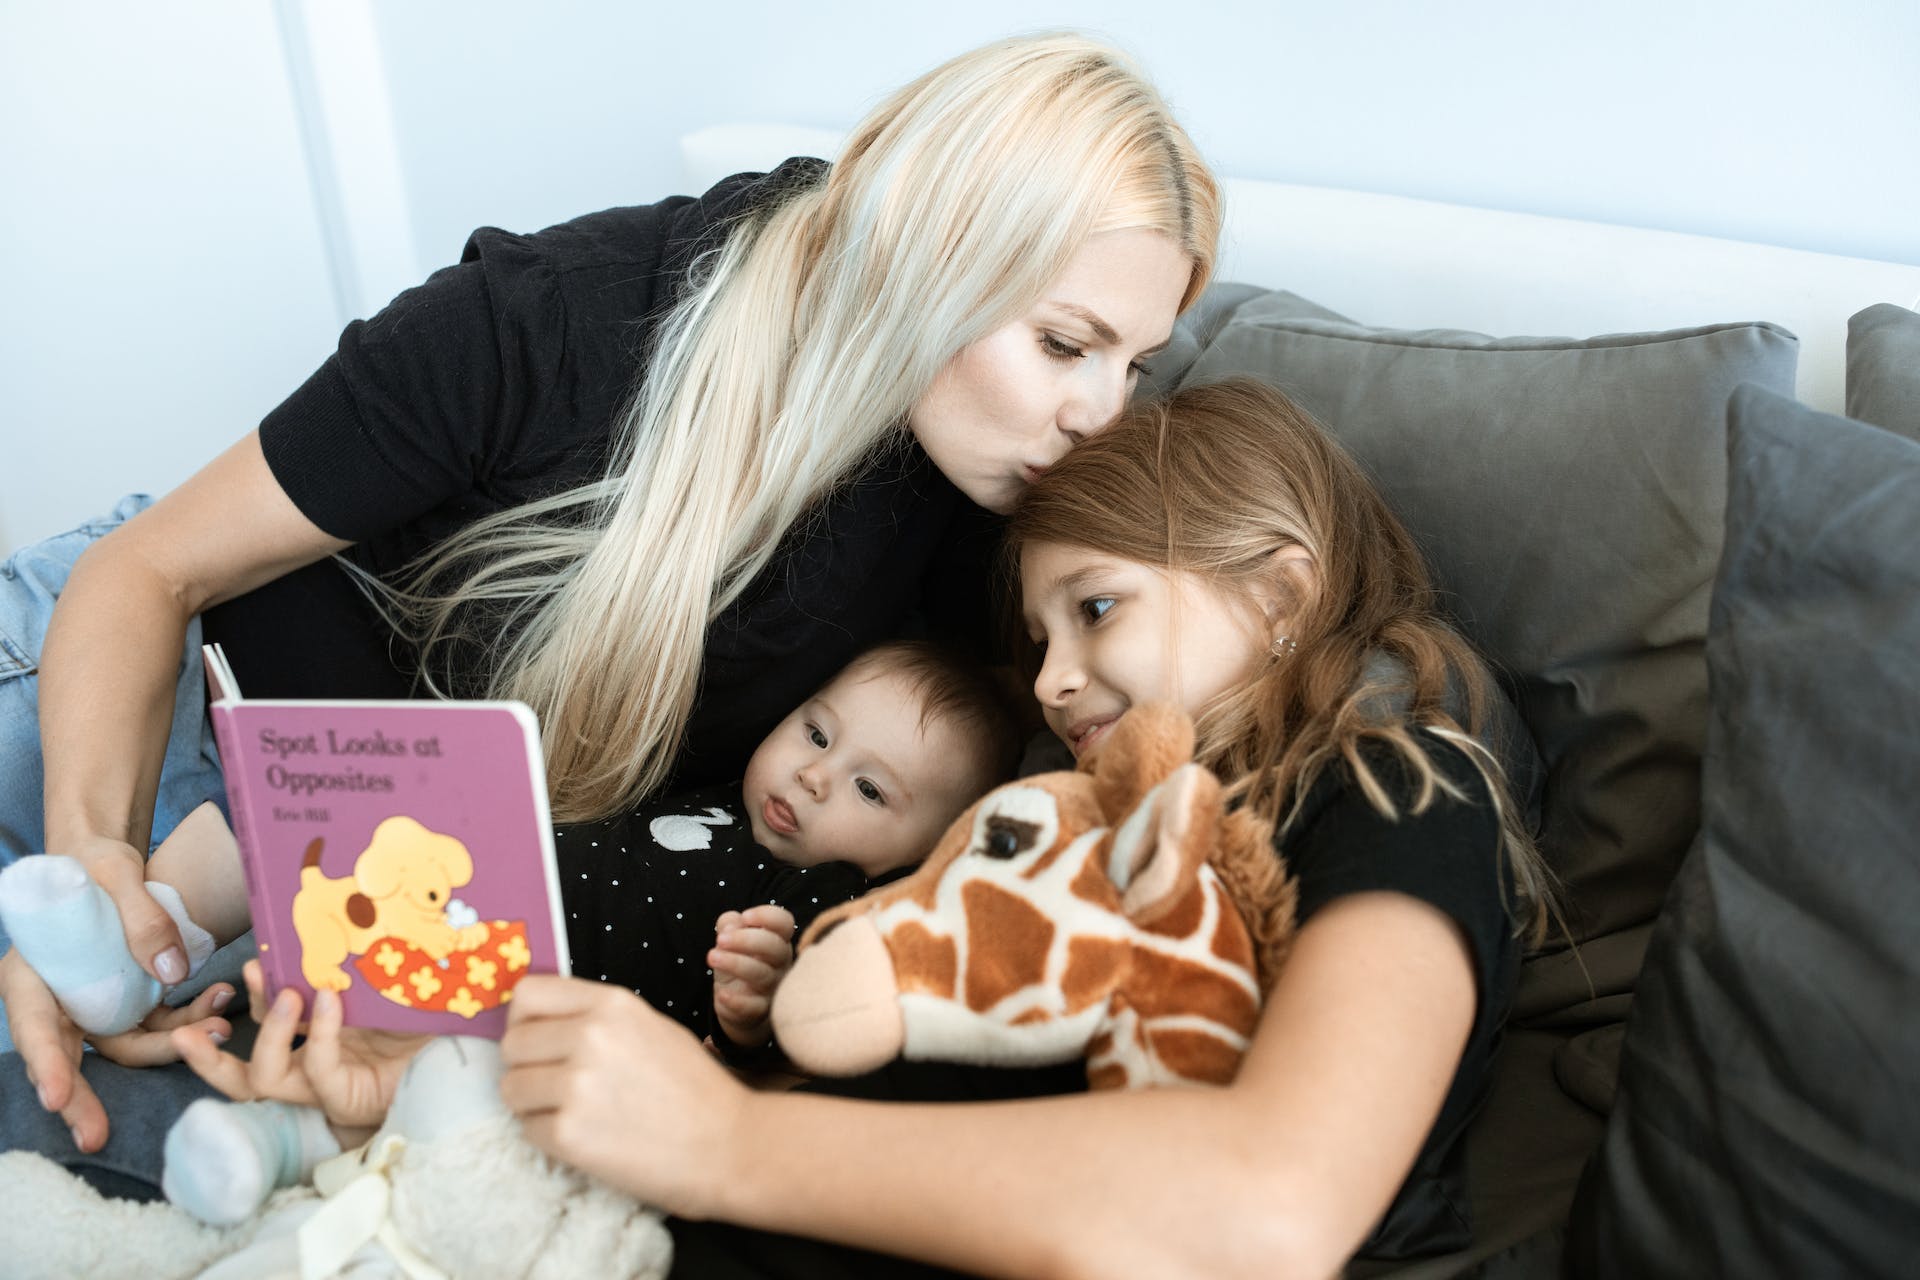 A woman bonding with her two children by reading them book | Source: Pexels